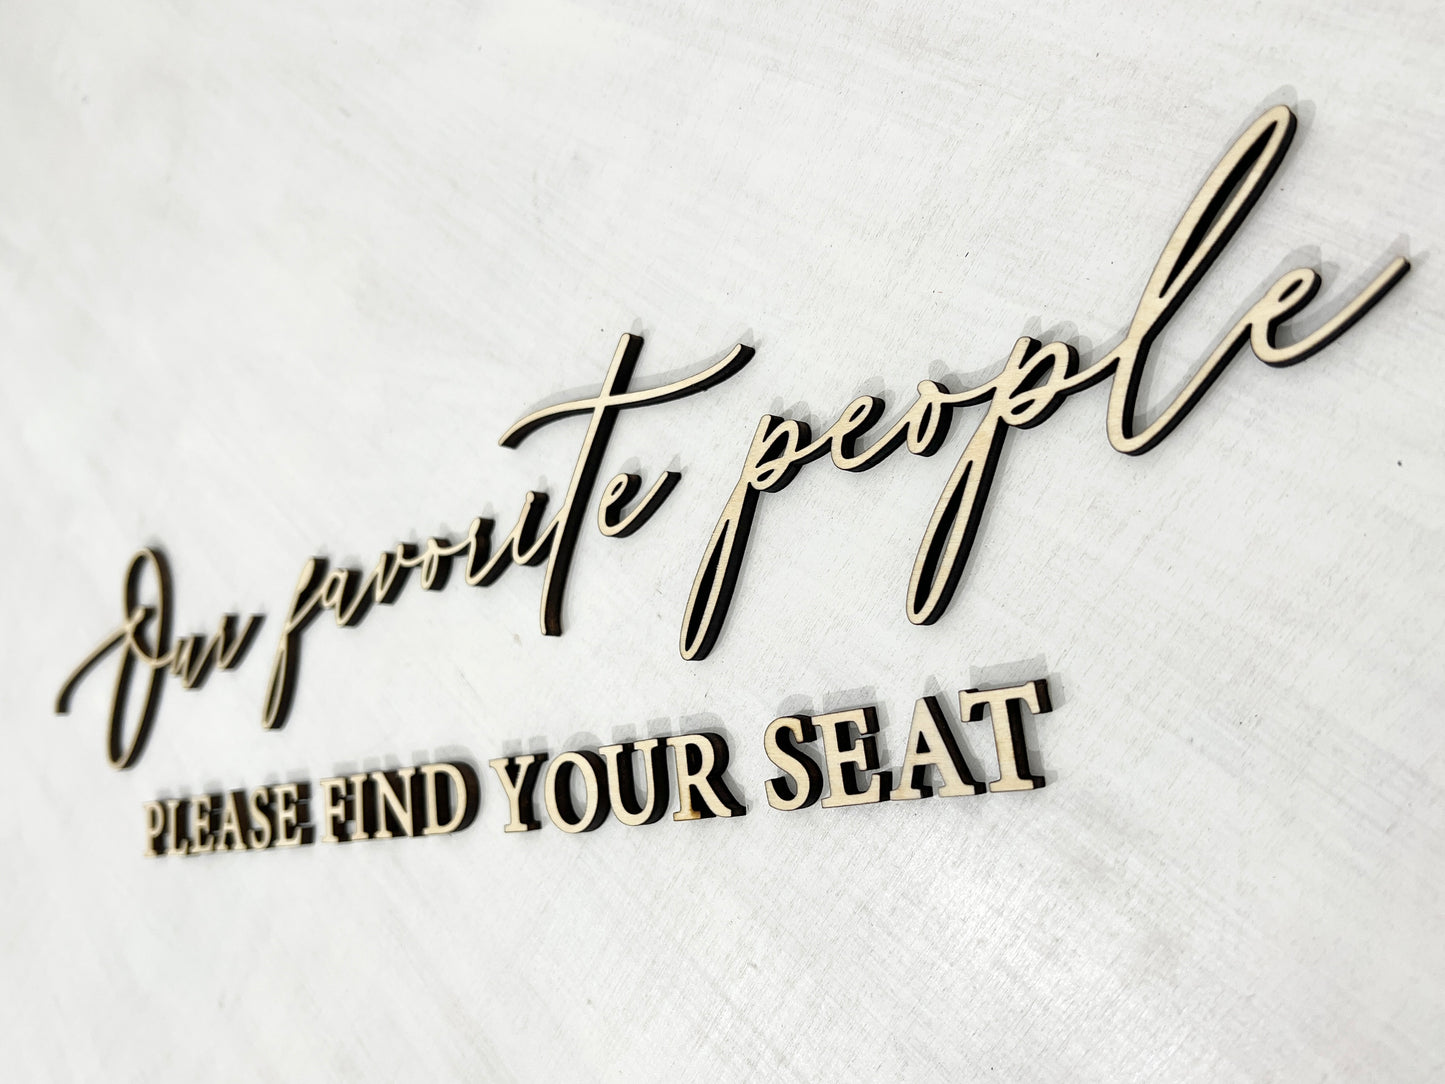 our favorite people please find your seat lettering kit